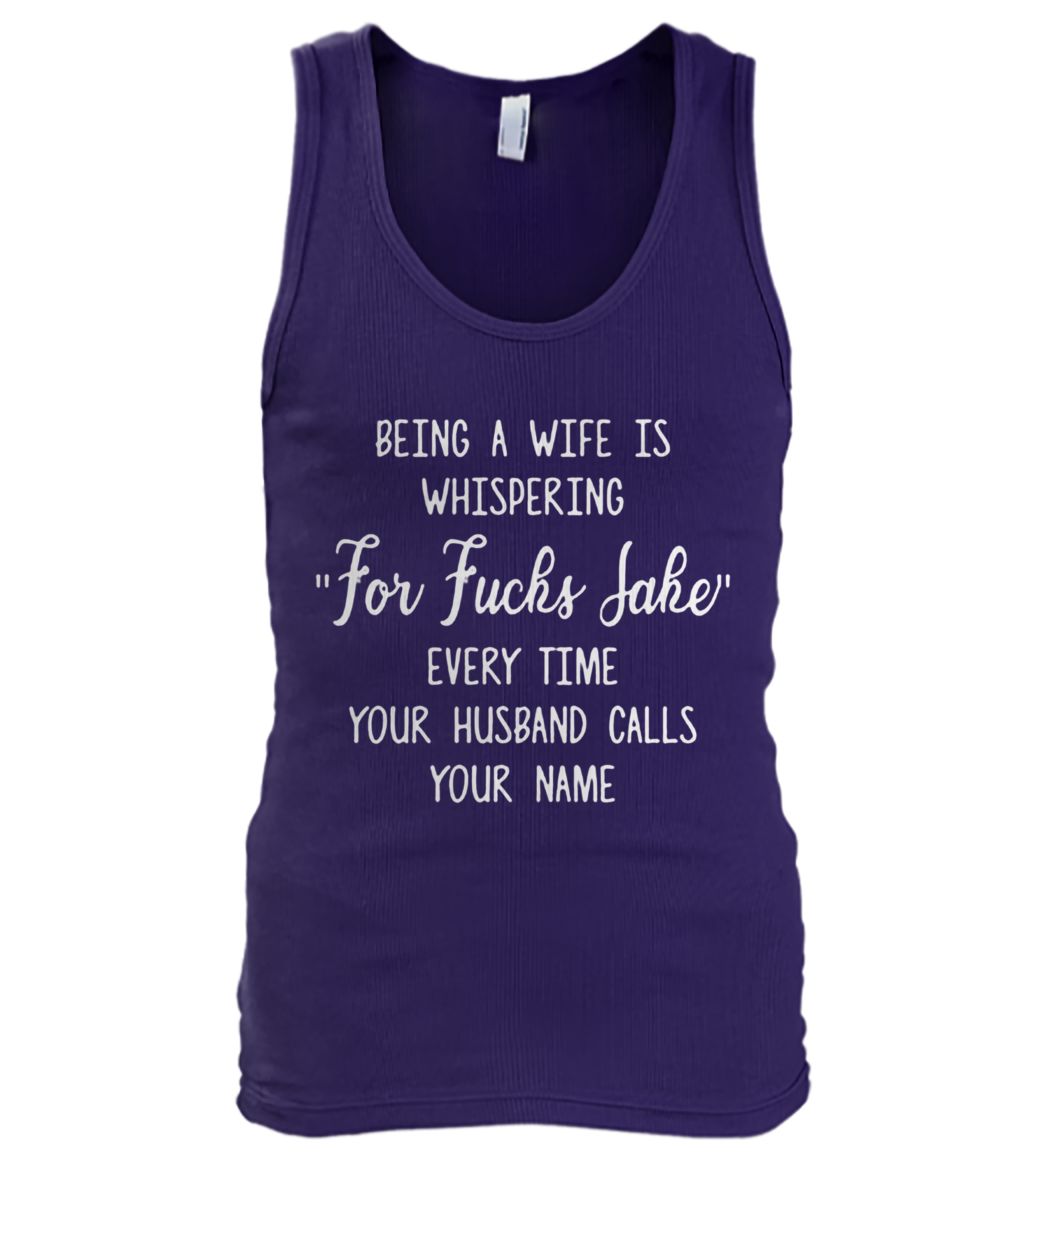 Being a wife is whispering for fuck sake men's tank top